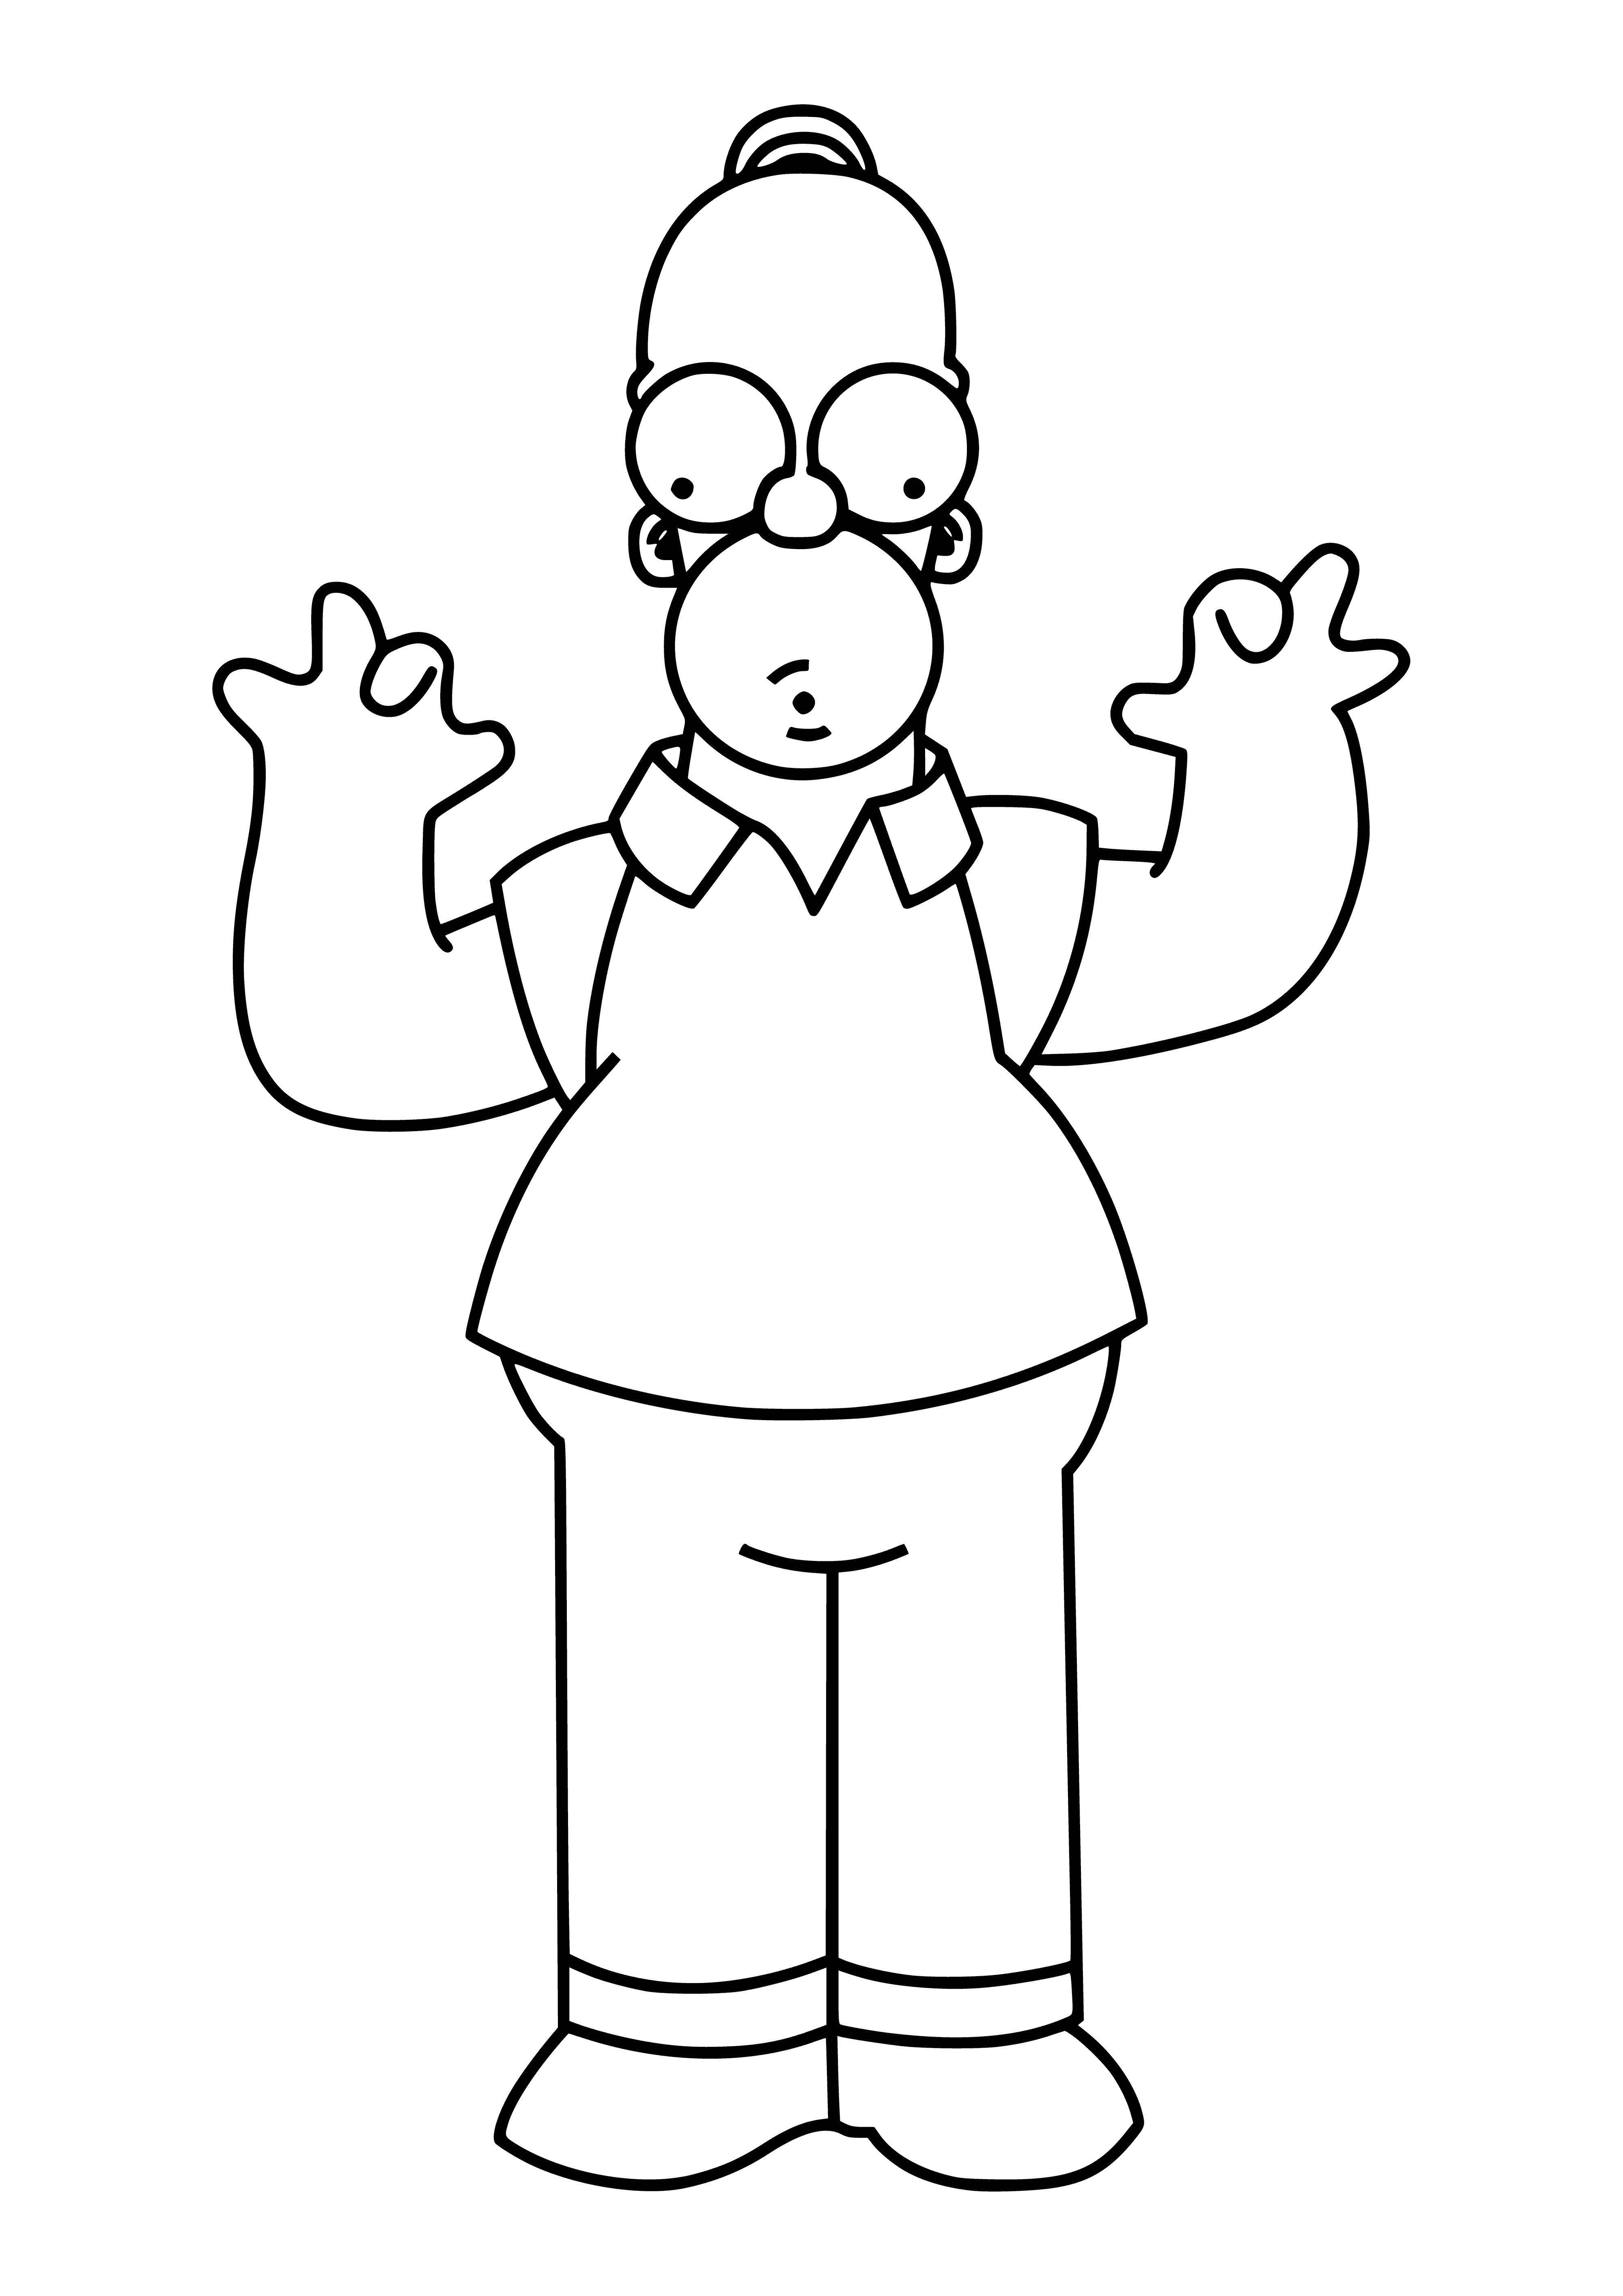 coloring page: Homer Simpson is a bored nuclear worker, married to Marge with 3 kids, Bart, Lisa and Maggie who often gets into trouble.